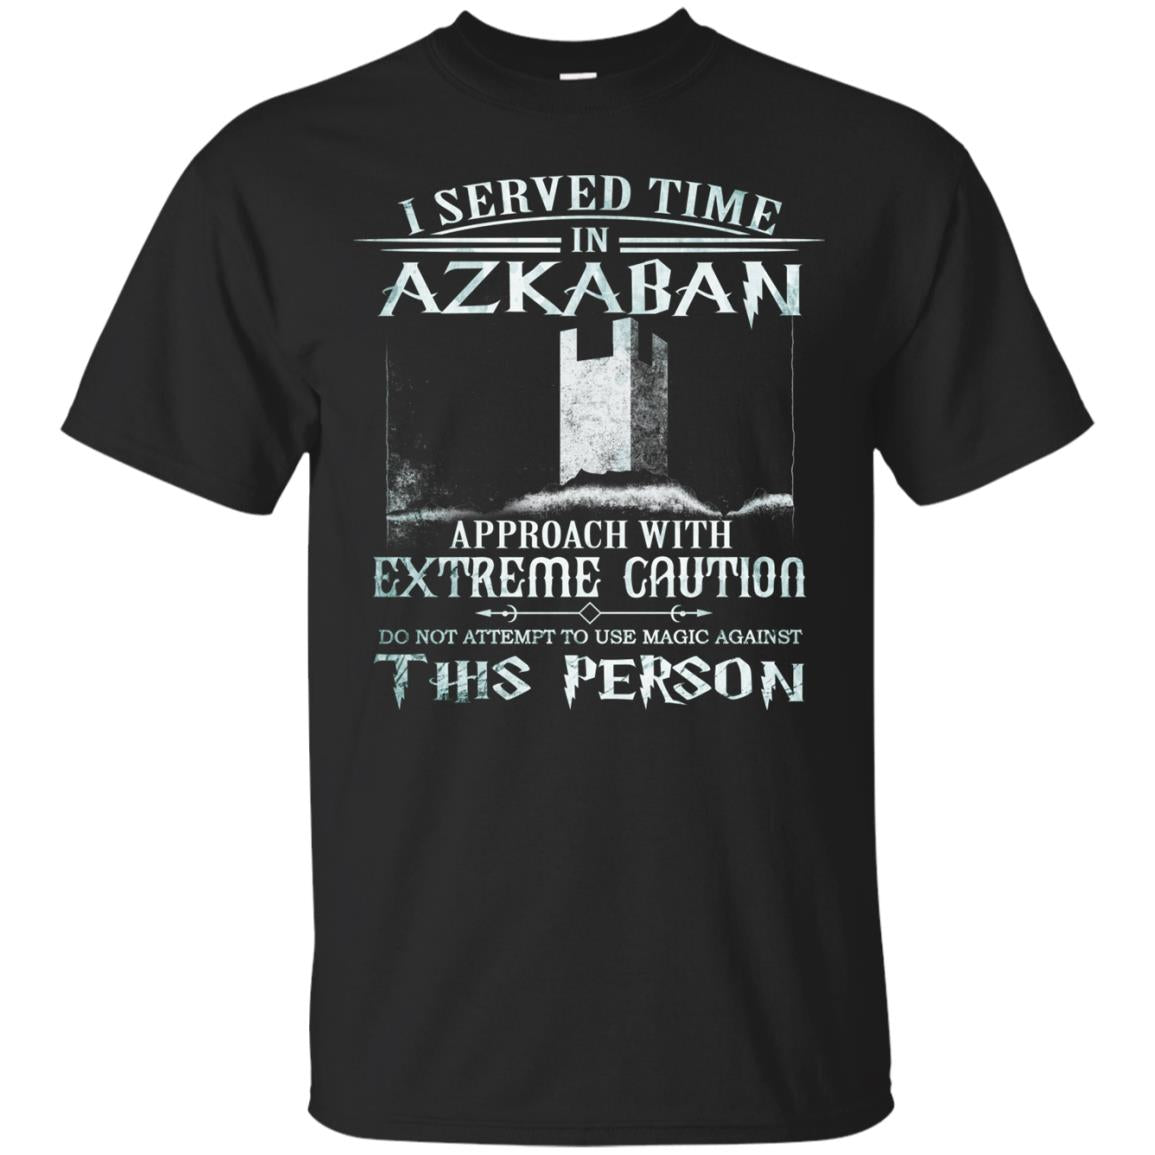 I Served Time In Azkaban Approach With Extreme Caution Harry Potter Fan T-shirtG200 Gildan Ultra Cotton T-Shirt